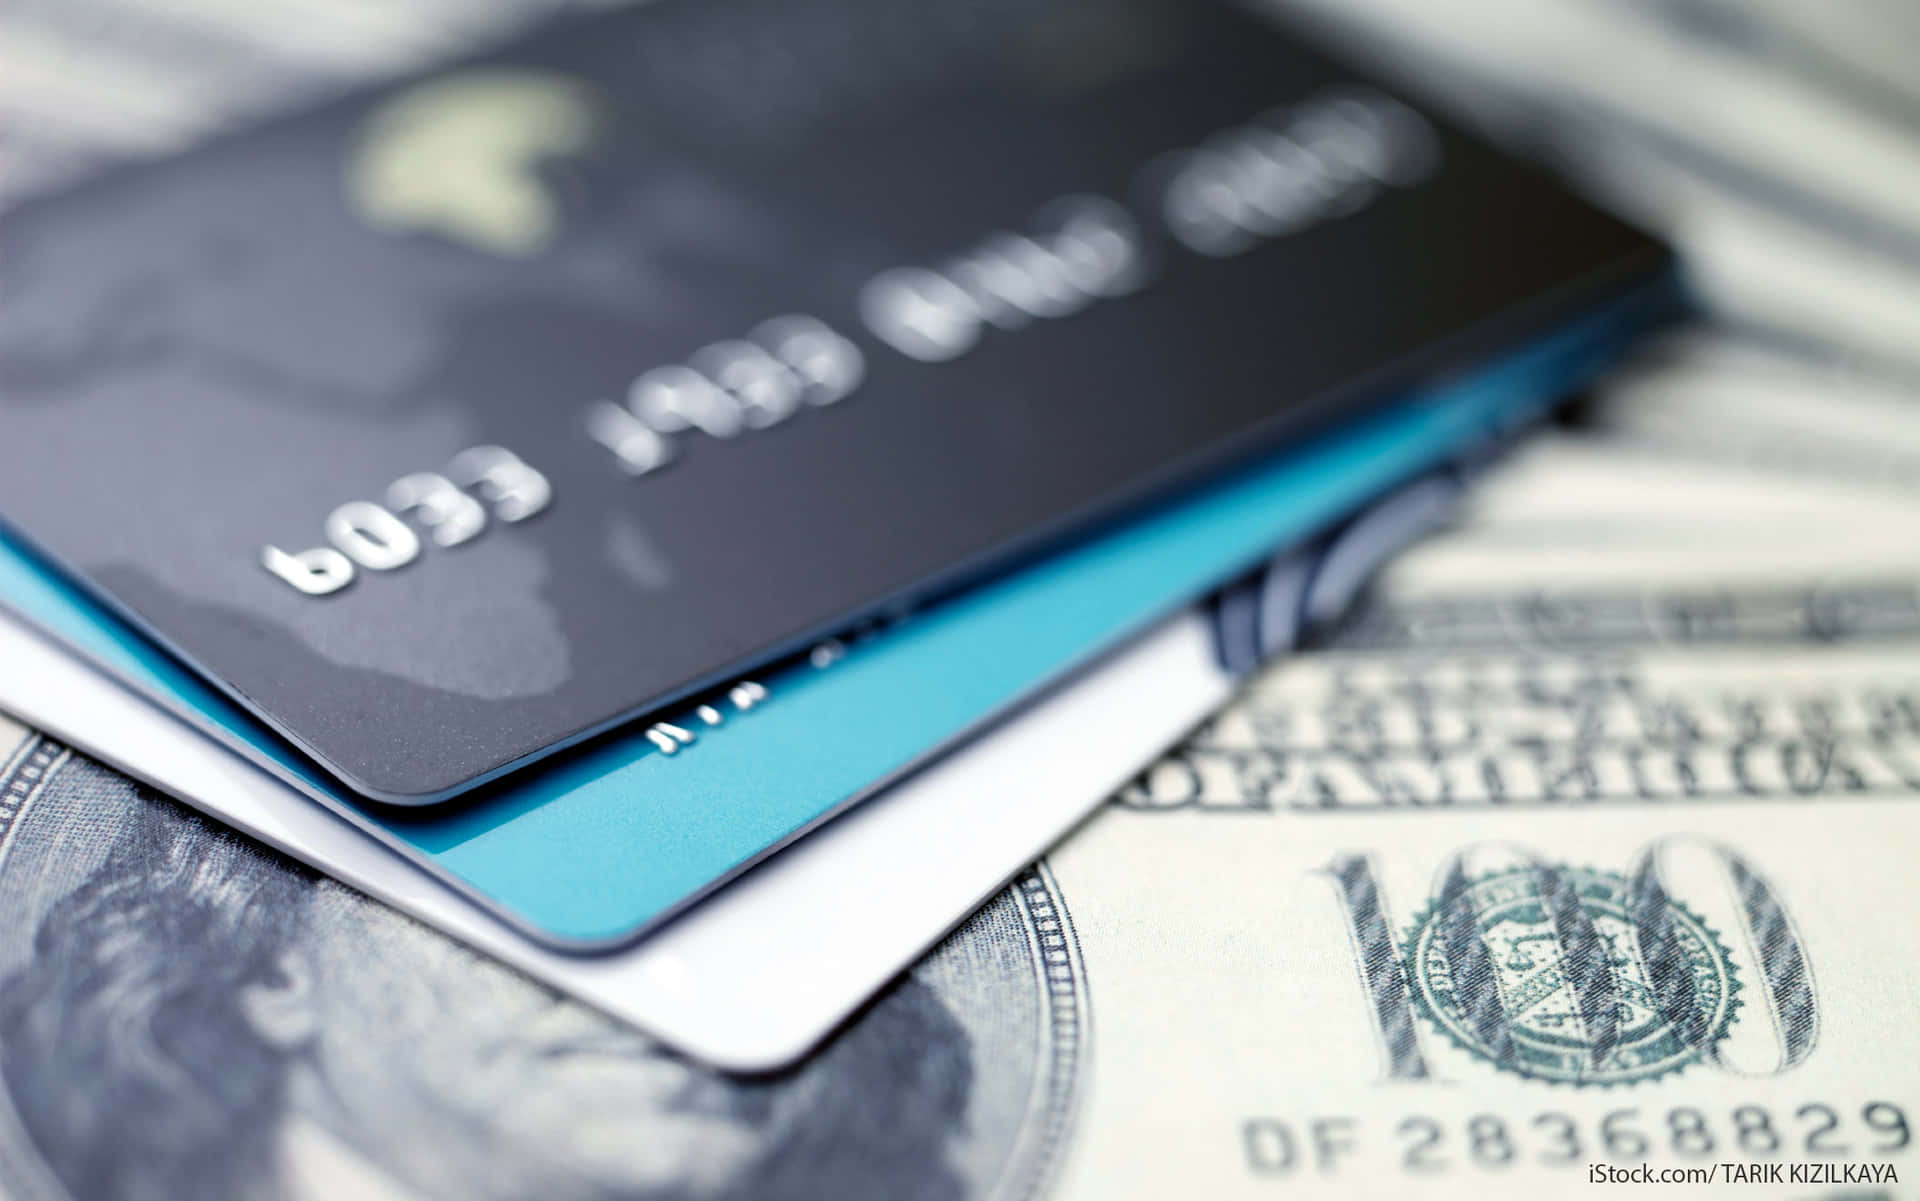 Get secure online payments with a credit card